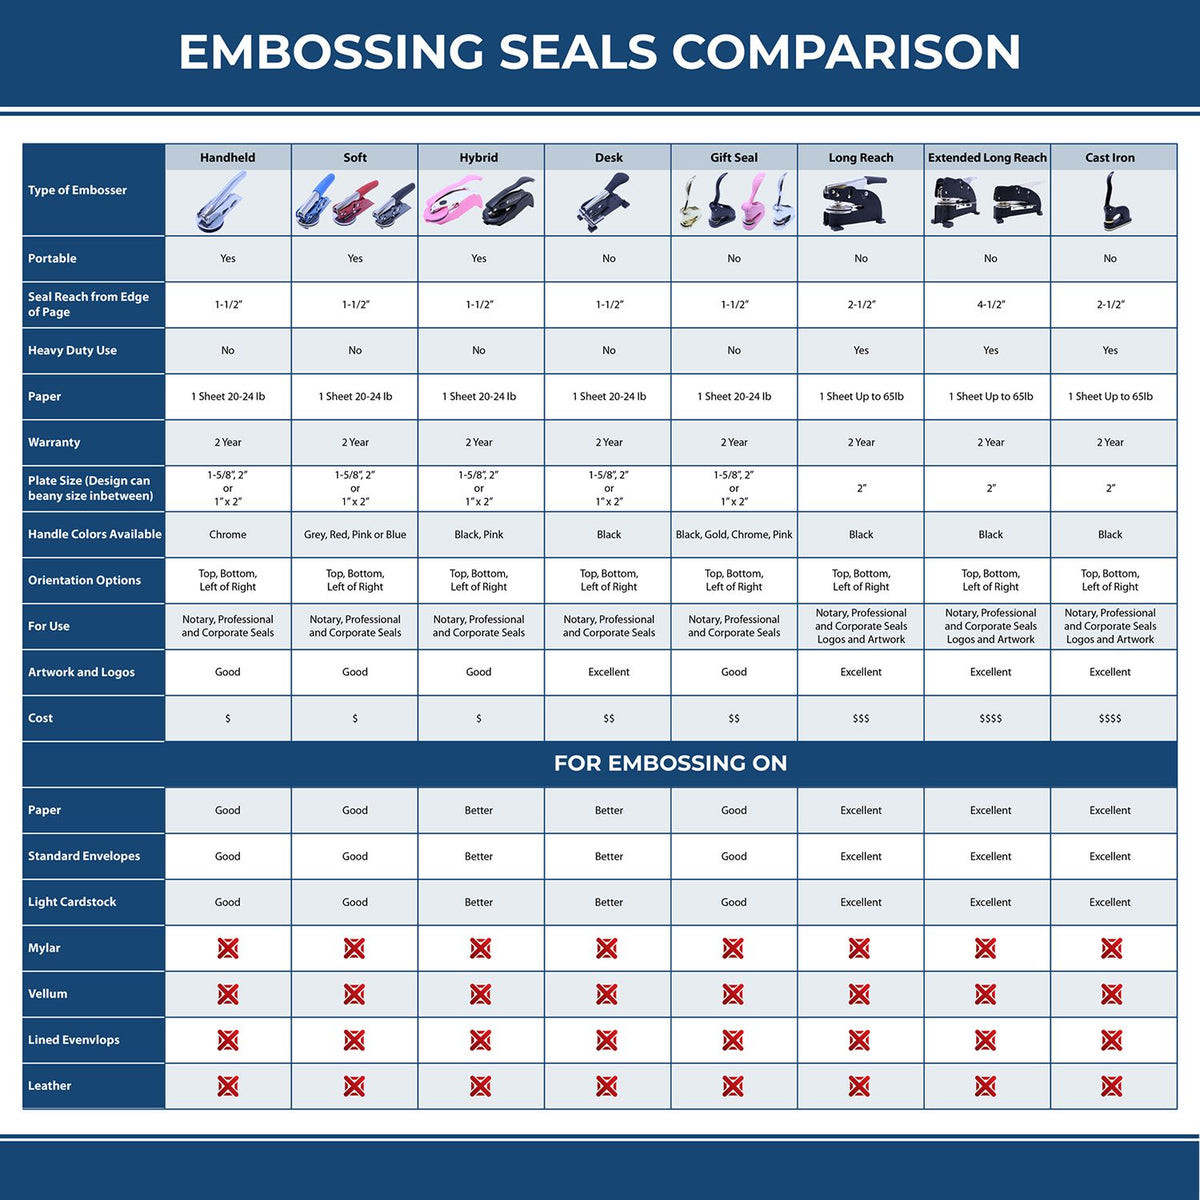 A comparison chart for the different types of mount models available for the Long Reach Maine Geology Seal